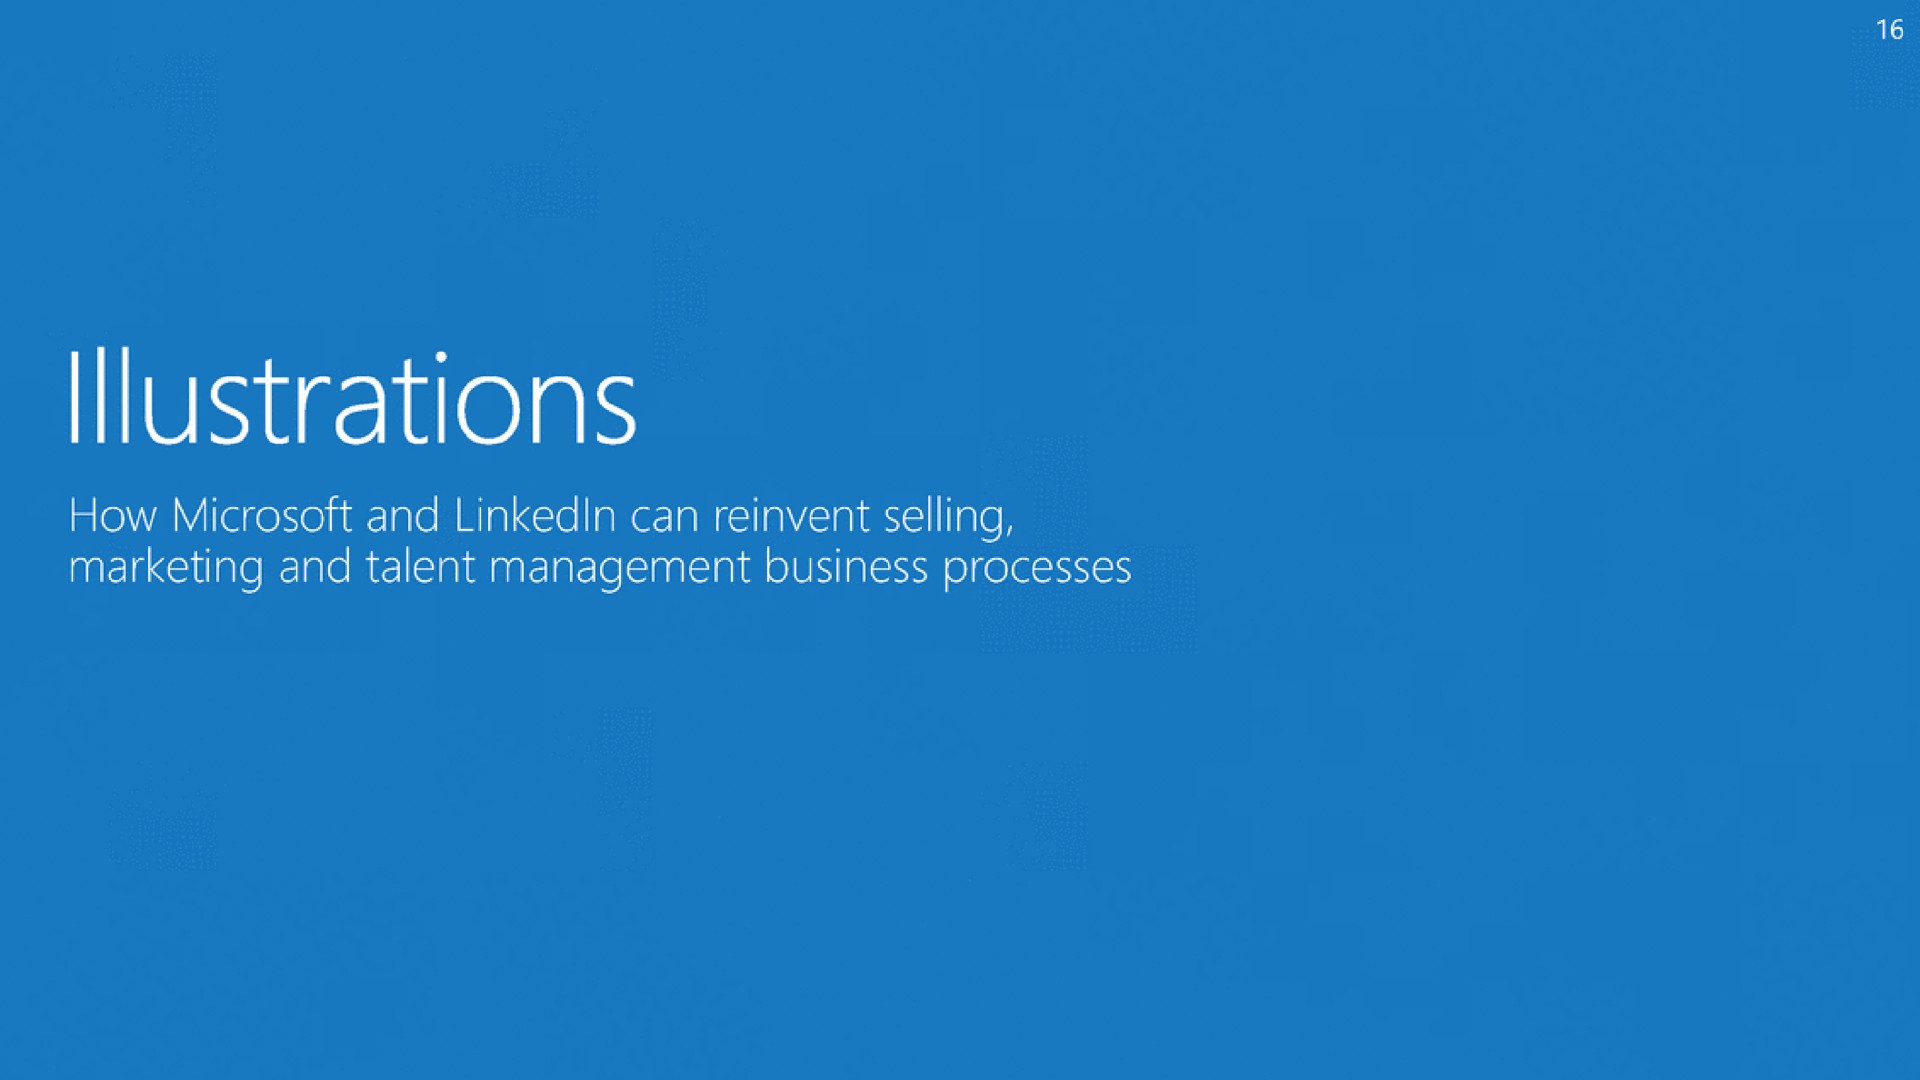 how and can reinvent selling marketing and talent management business processes | Microsoft